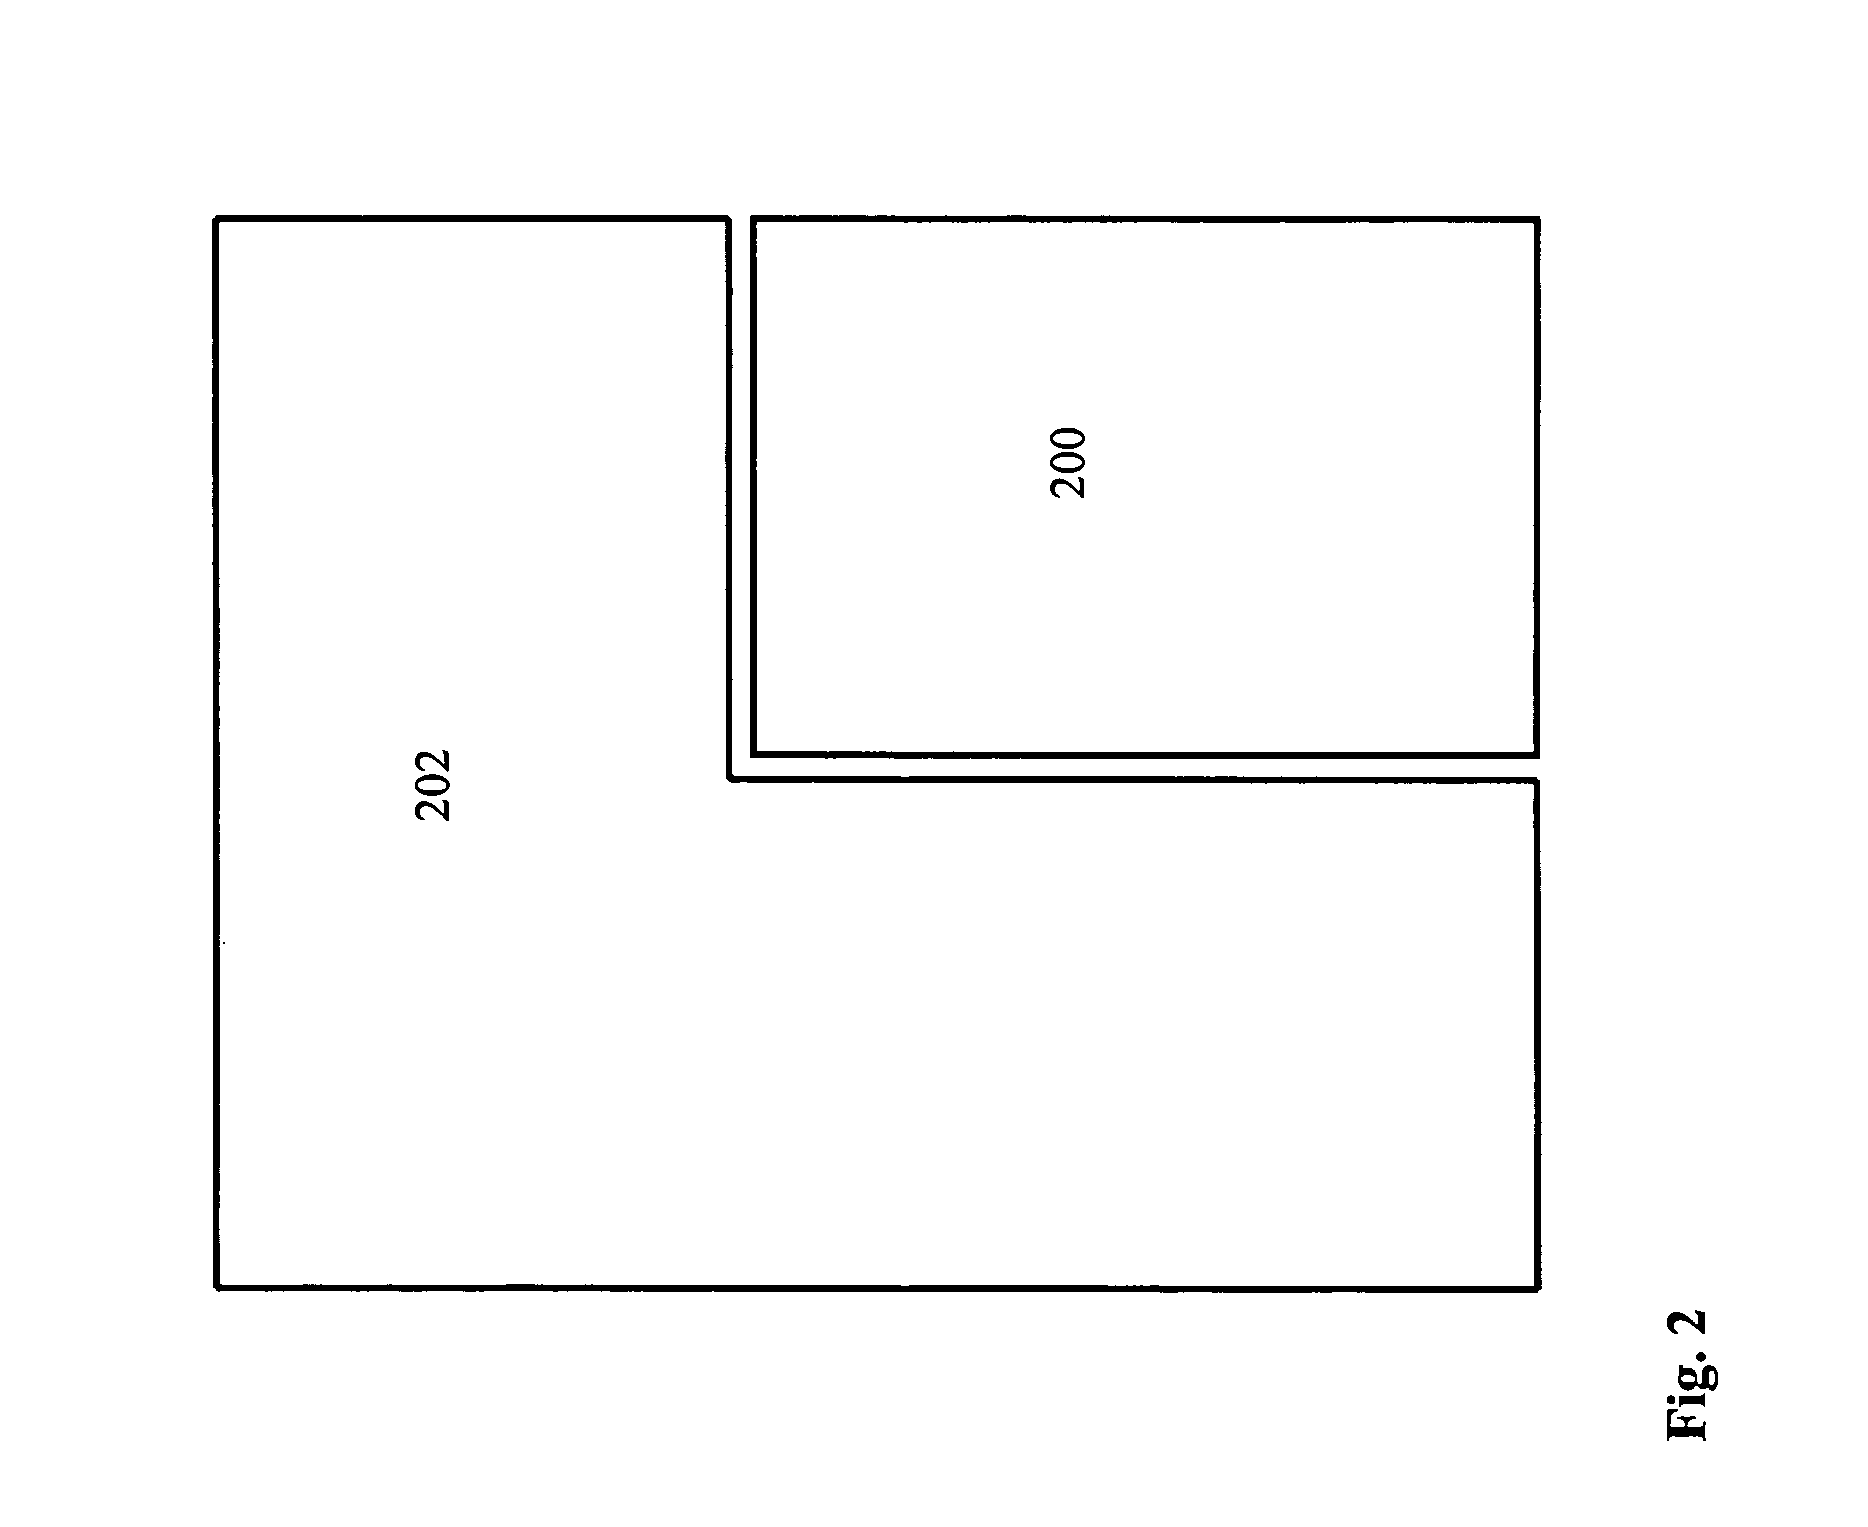 Method for generating tester controls